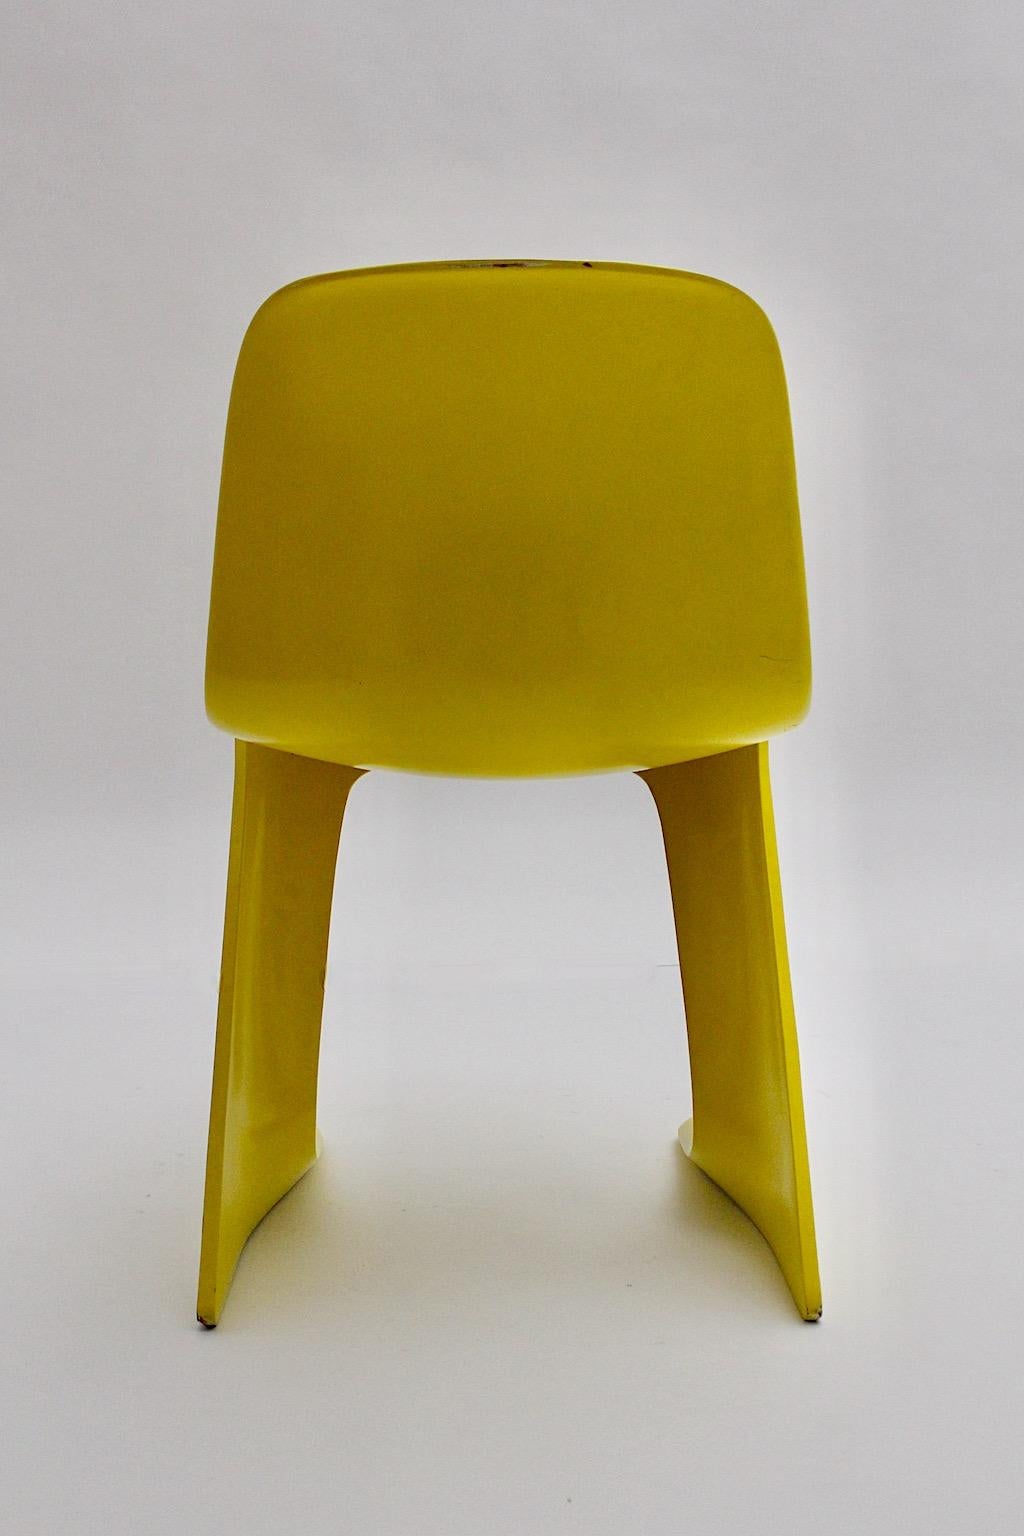 Space Age Vintage Yellow Plastic Chair Kangaroo Chair Ernst Moeckl 1960s Germany For Sale 1